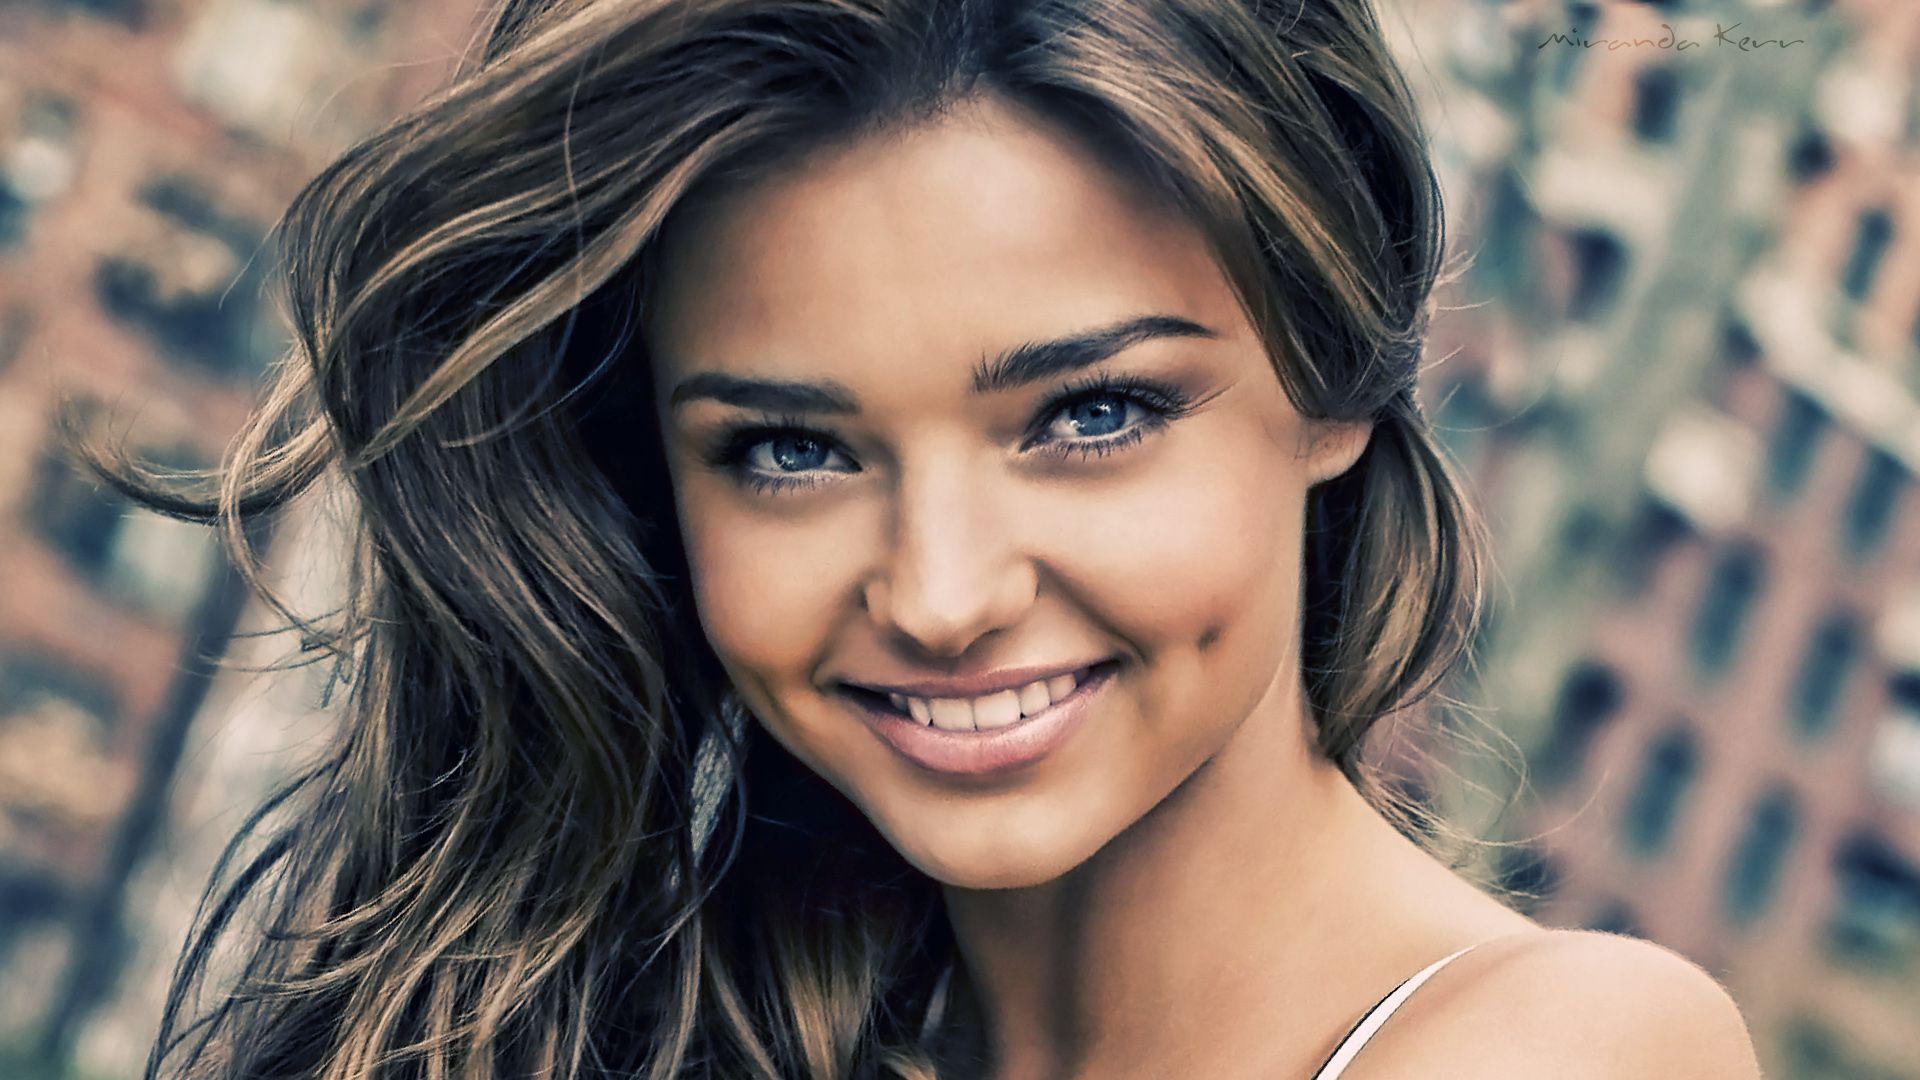 Miranda Kerr Picture, High Definition, High Quality